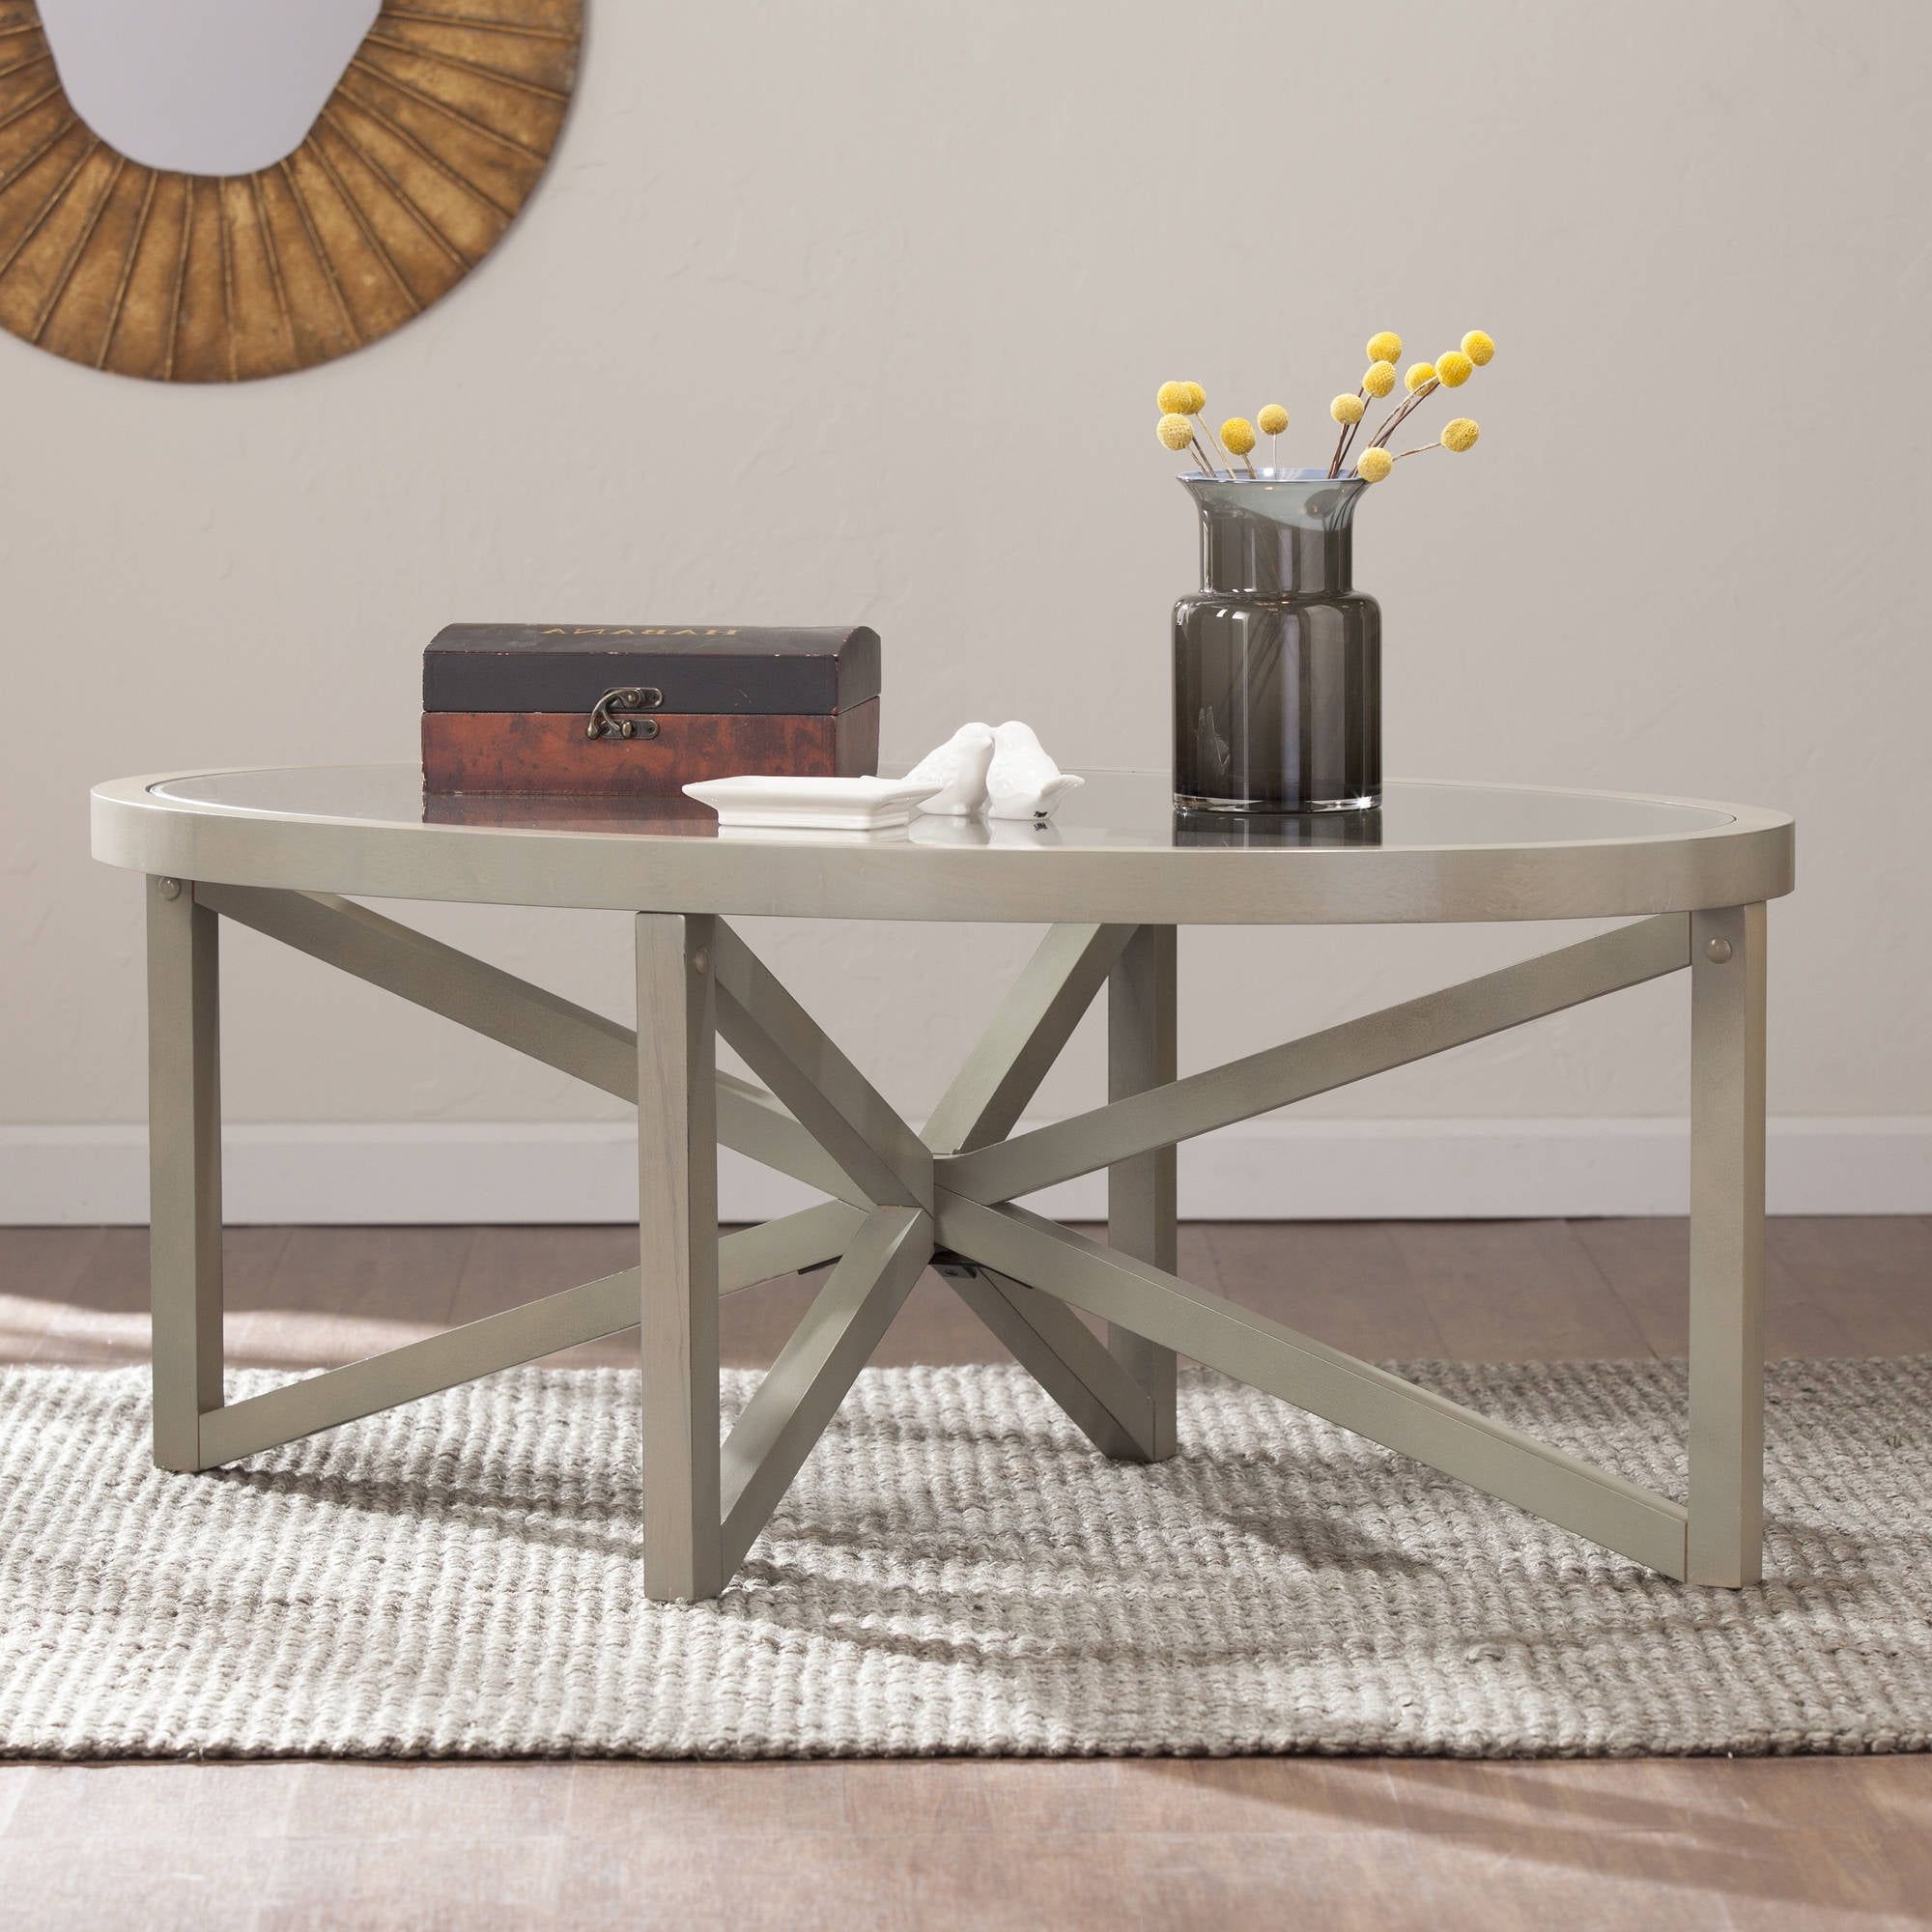 Southern Enterprises Starburst Oval Coffee Table, French Gray – Walmart Pertaining To Southern Enterprises Larksmill Coffee Tables (Gallery 20 of 20)